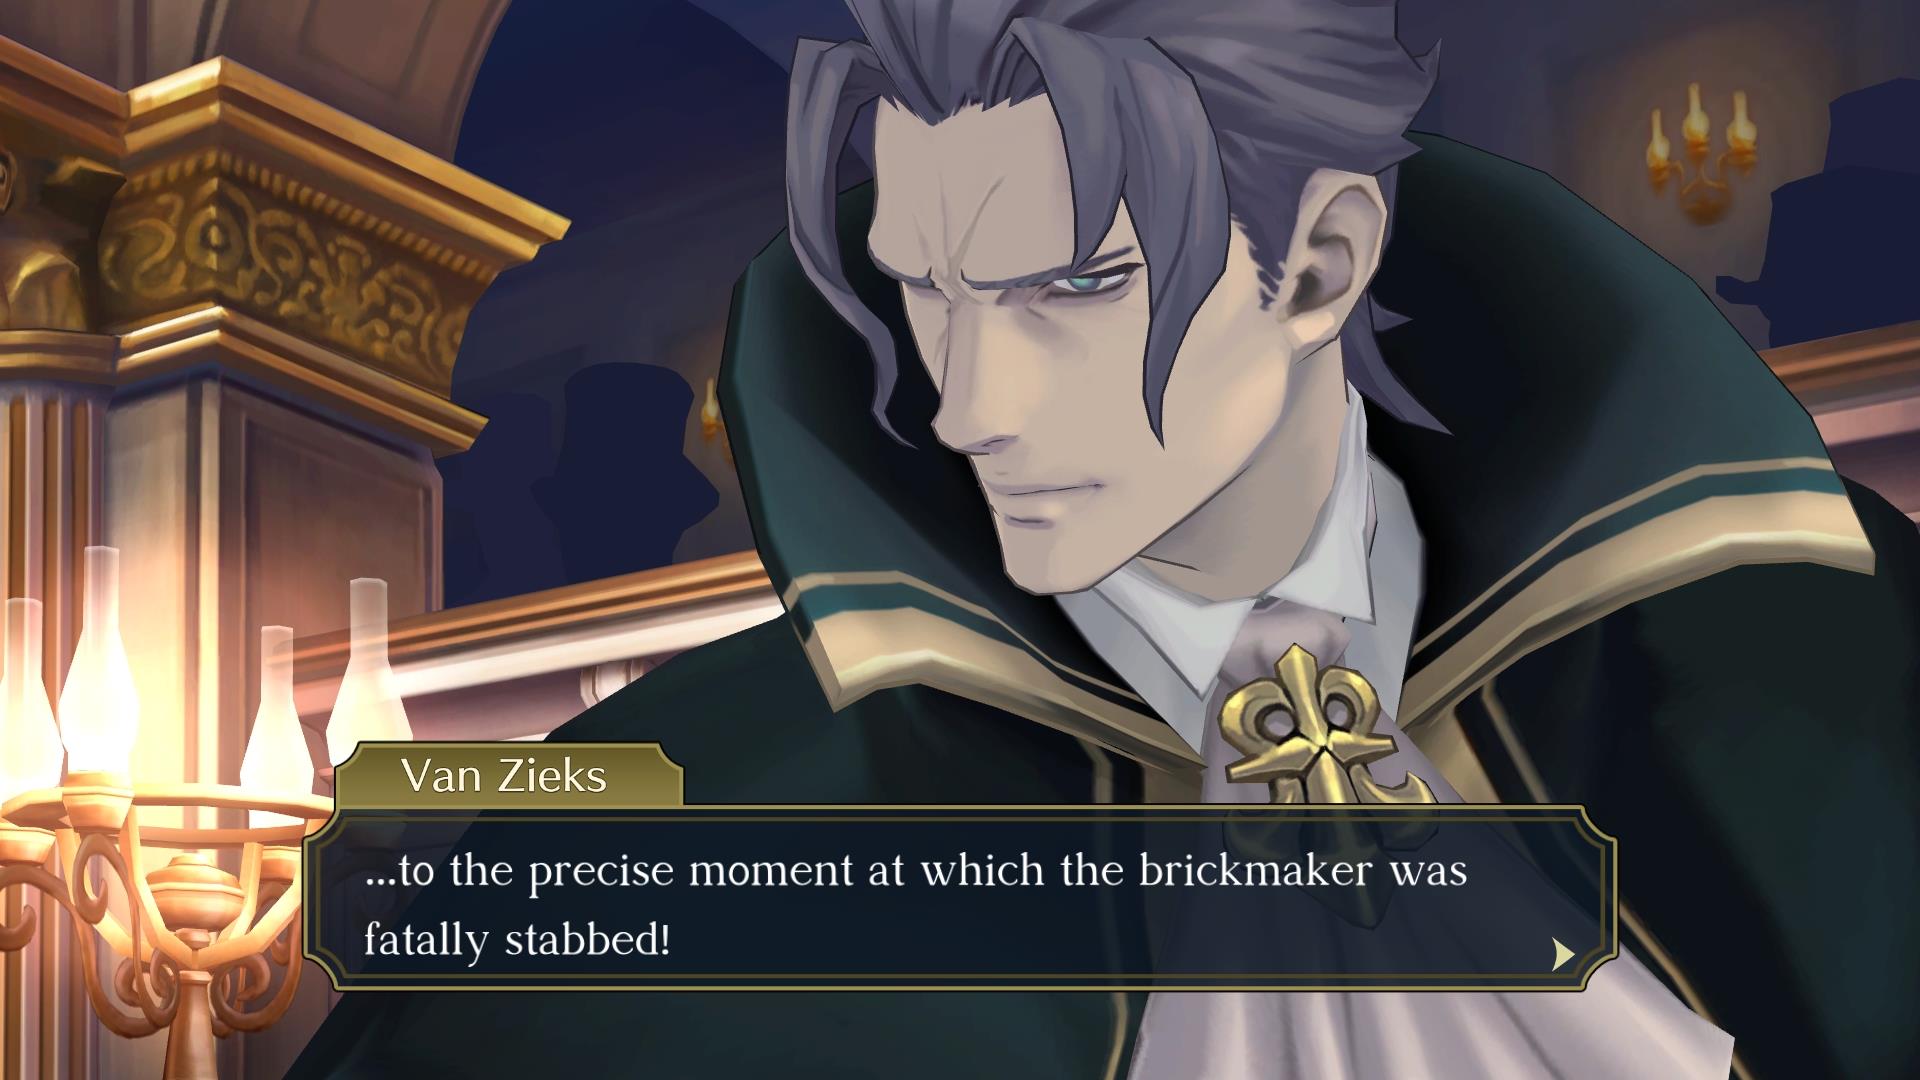 The Great Ace Attorney Chronicles Confirmed for Western Release in July ...